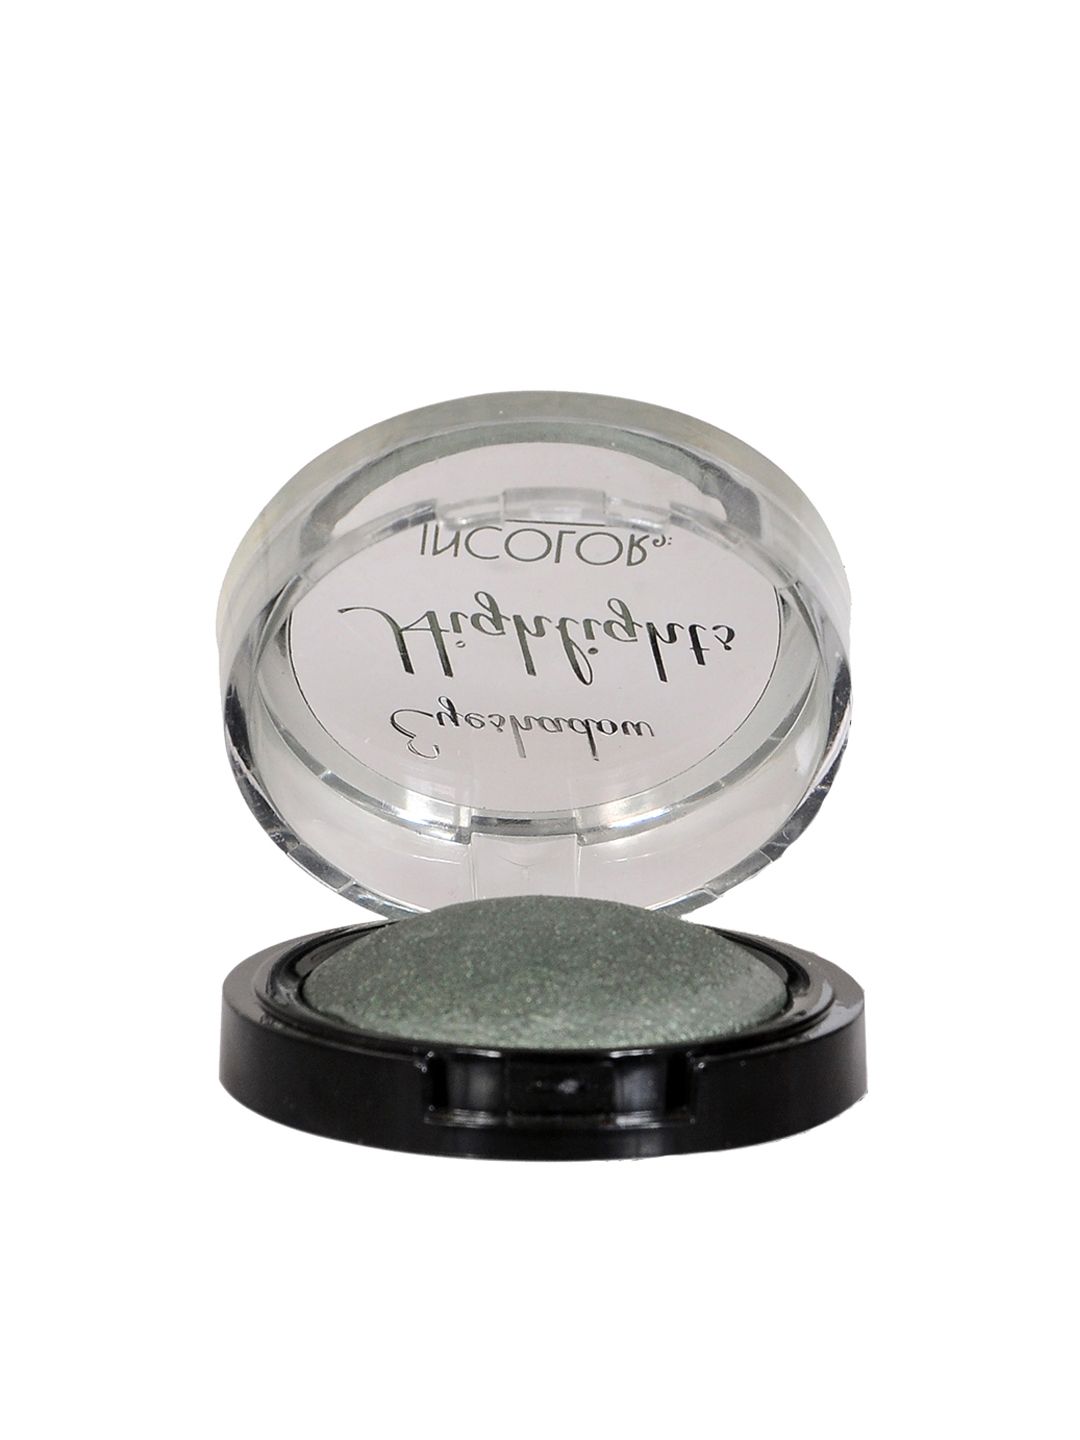 INCOLOR Grey Highlight Eyeshadow 09 4.5 gms Price in India